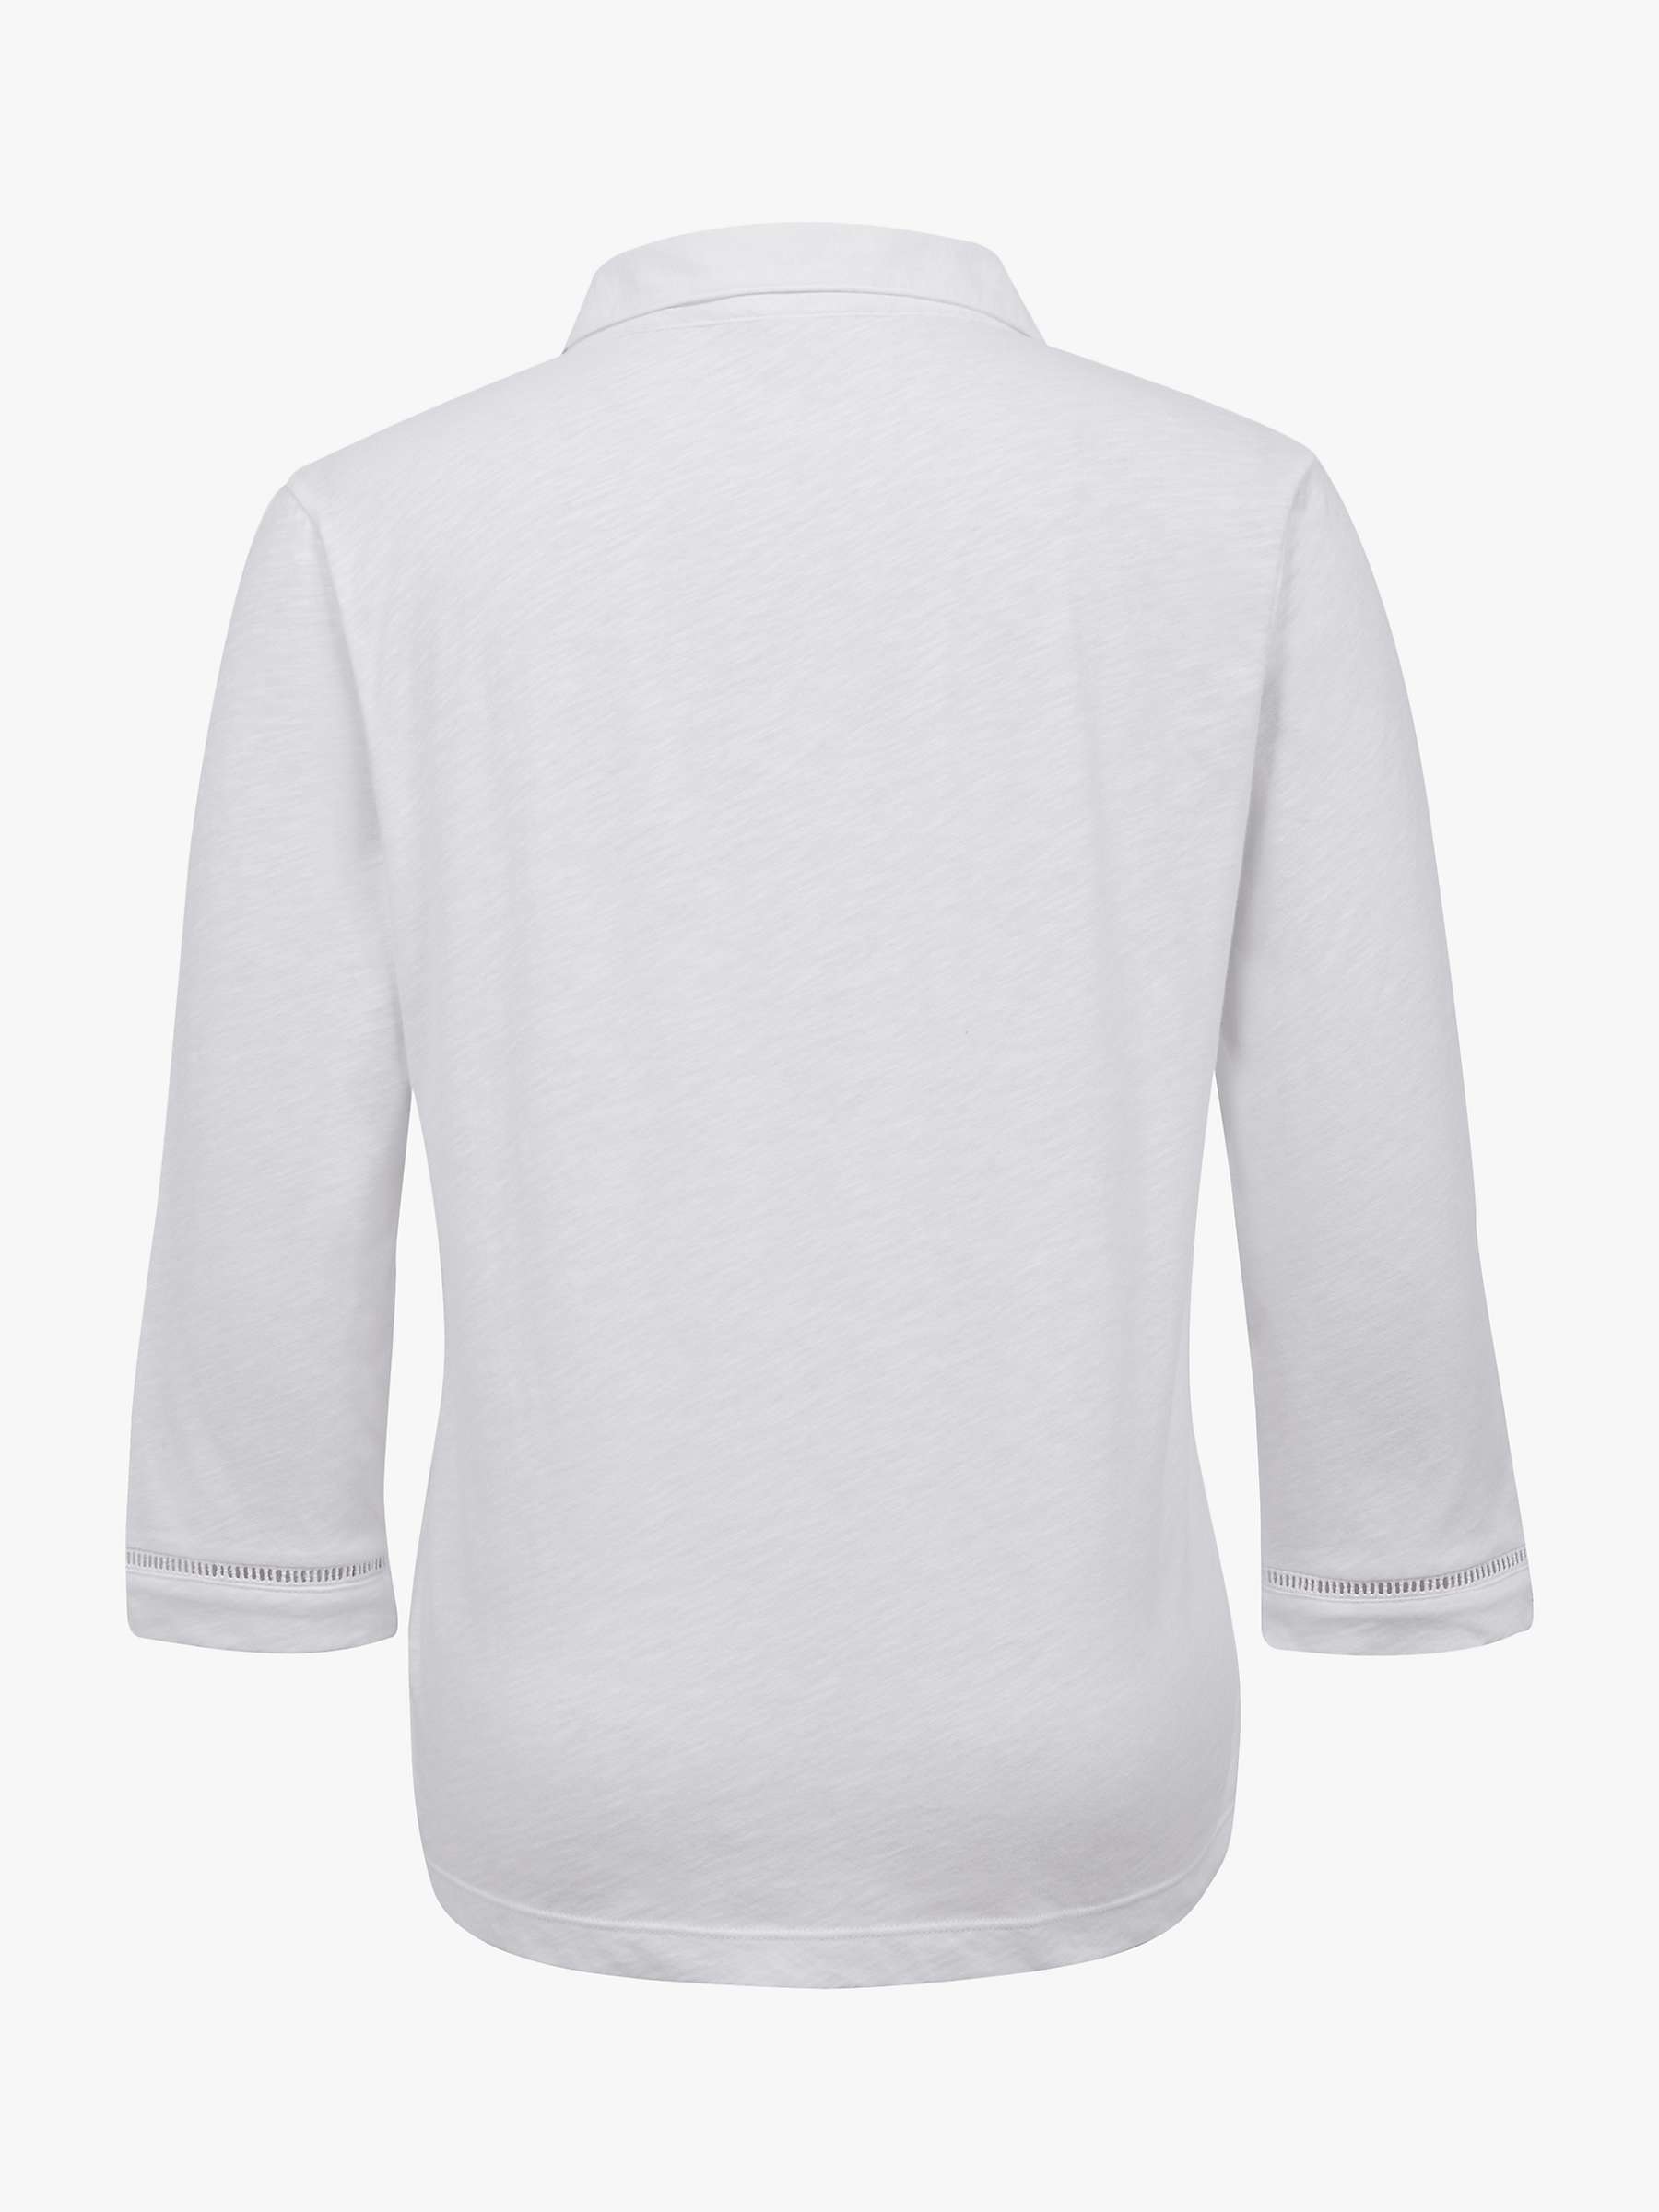 Buy Celtic & Co. Organic Cotton Jersey Trim Detail Polo Top, White Online at johnlewis.com